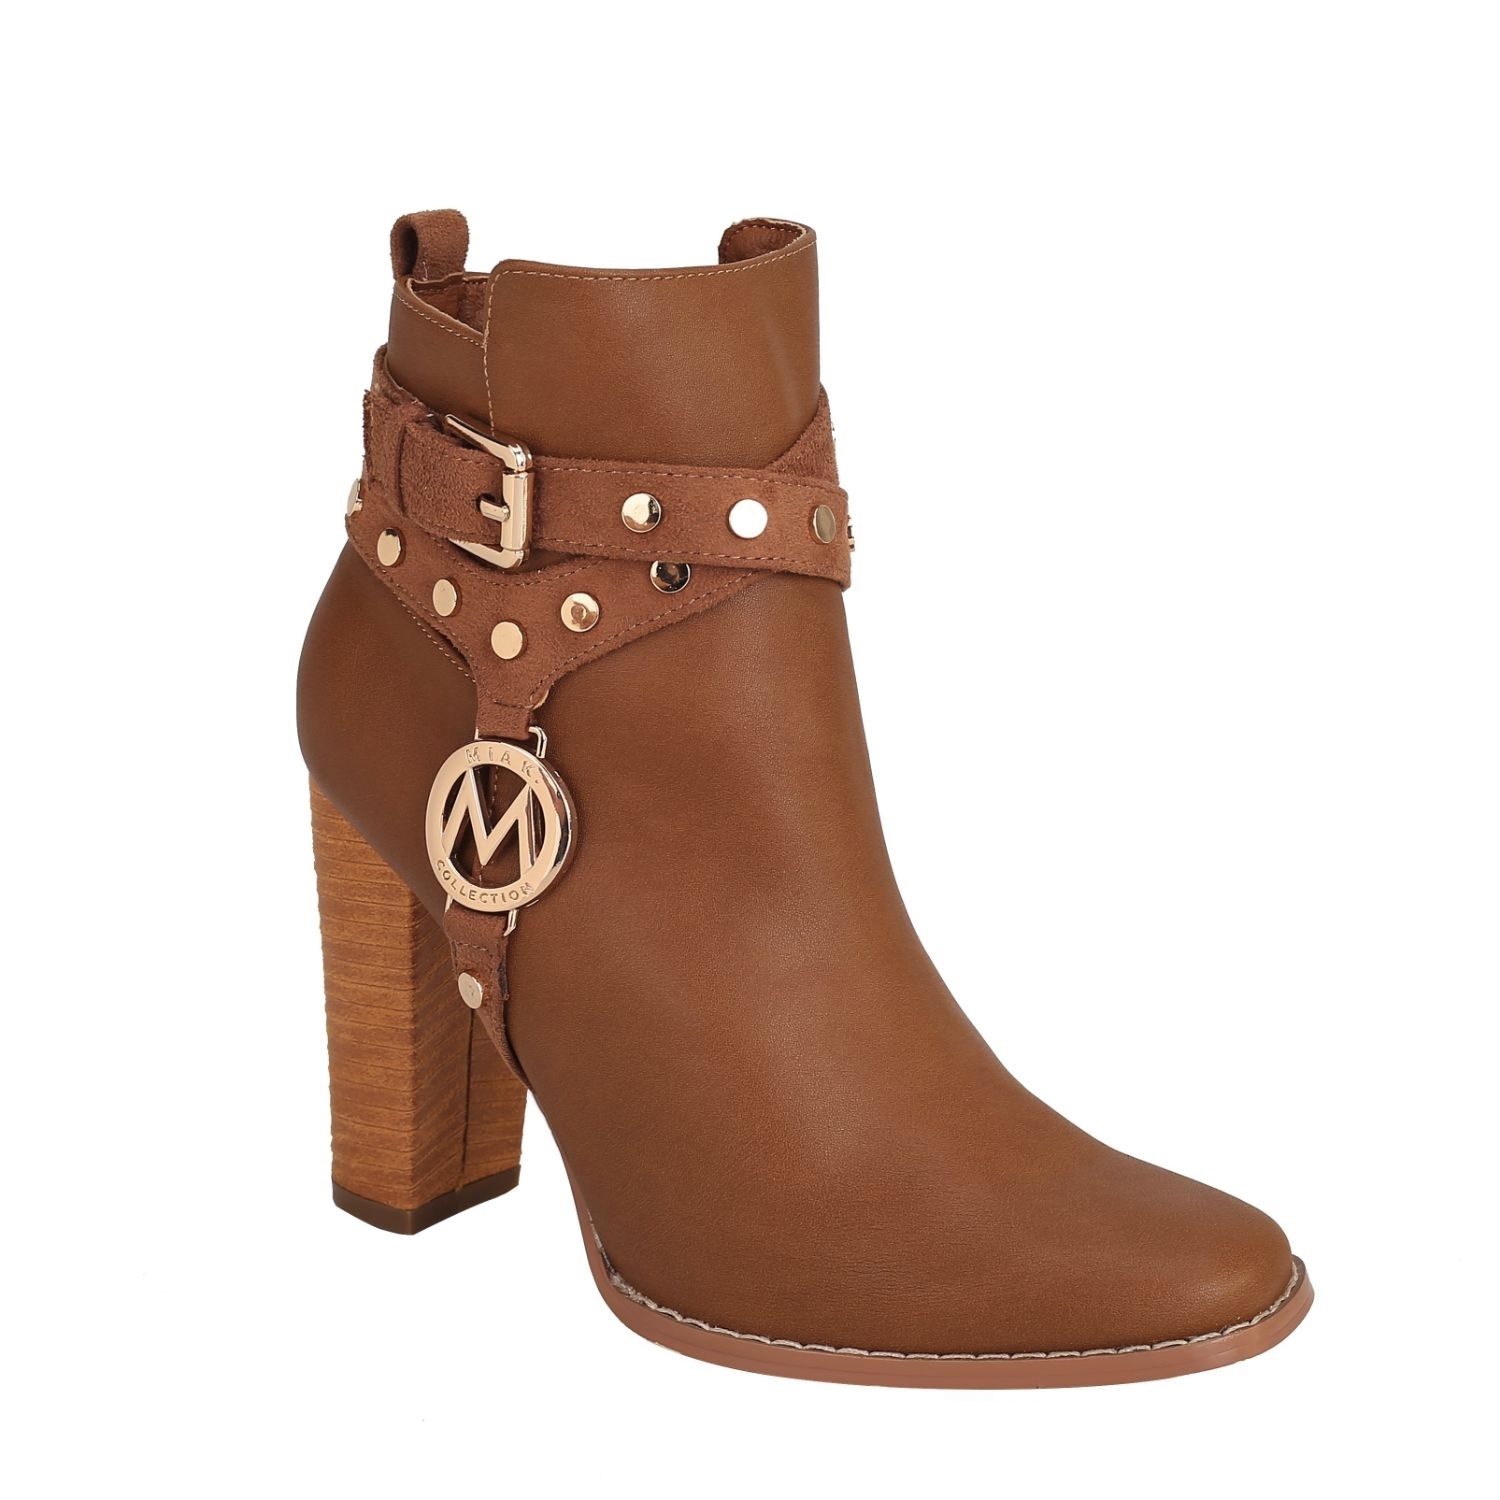 MKF Collection Brooke Ankle Women's Boot With Wide Heel By Mia K - Cognac-8